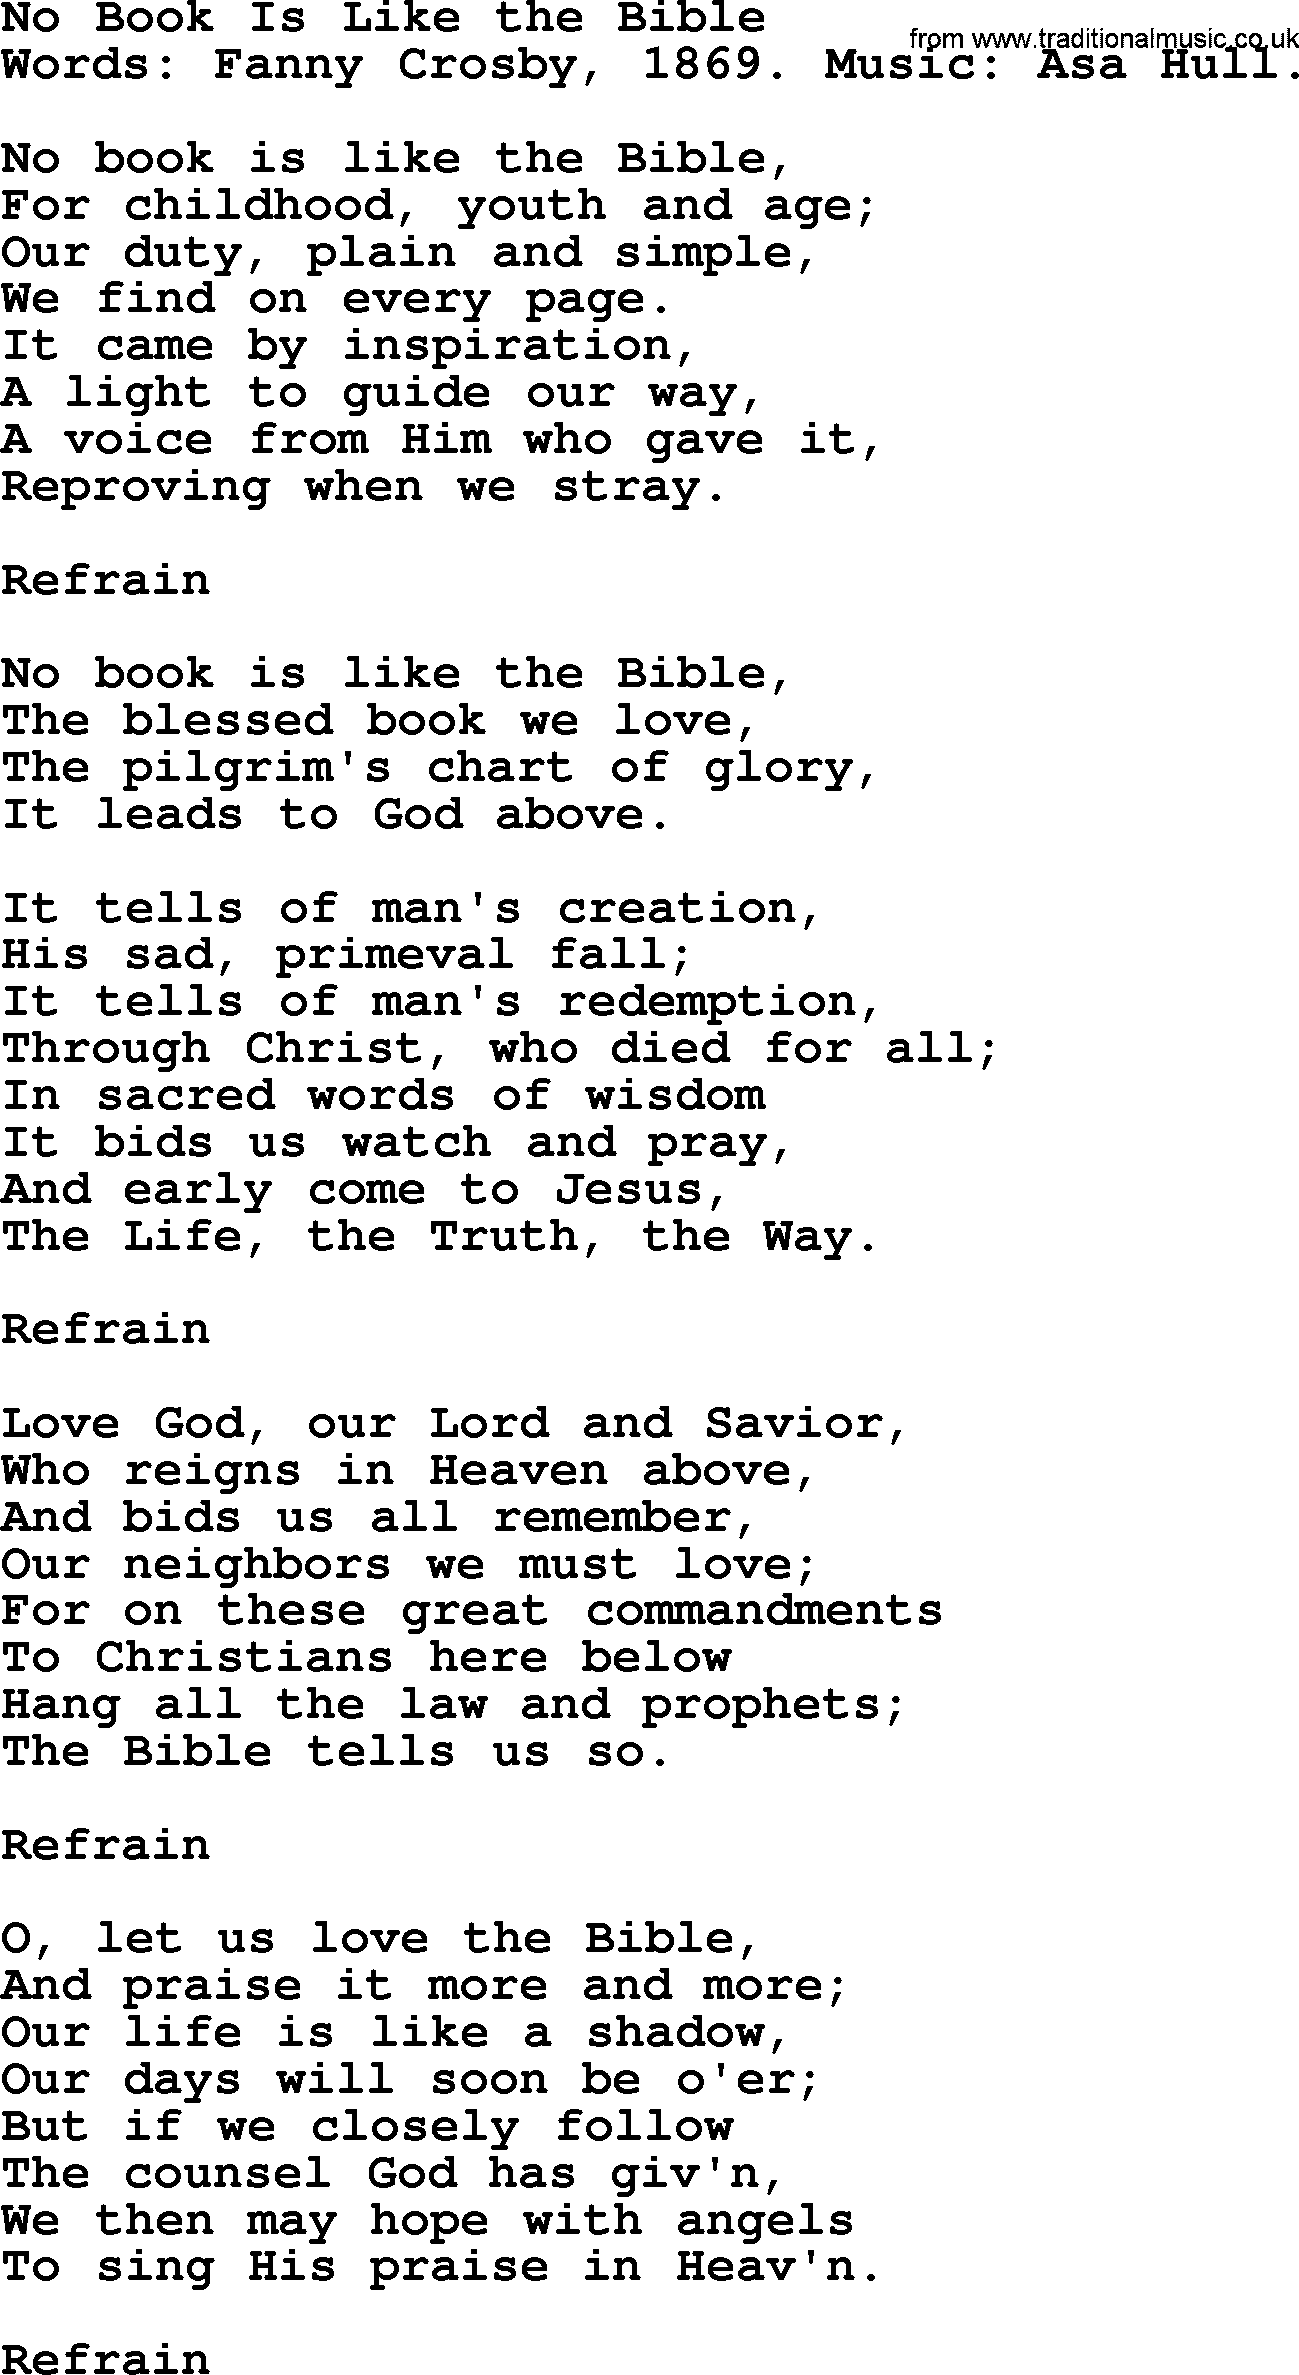 Fanny Crosby song: No Book Is Like The Bible, lyrics